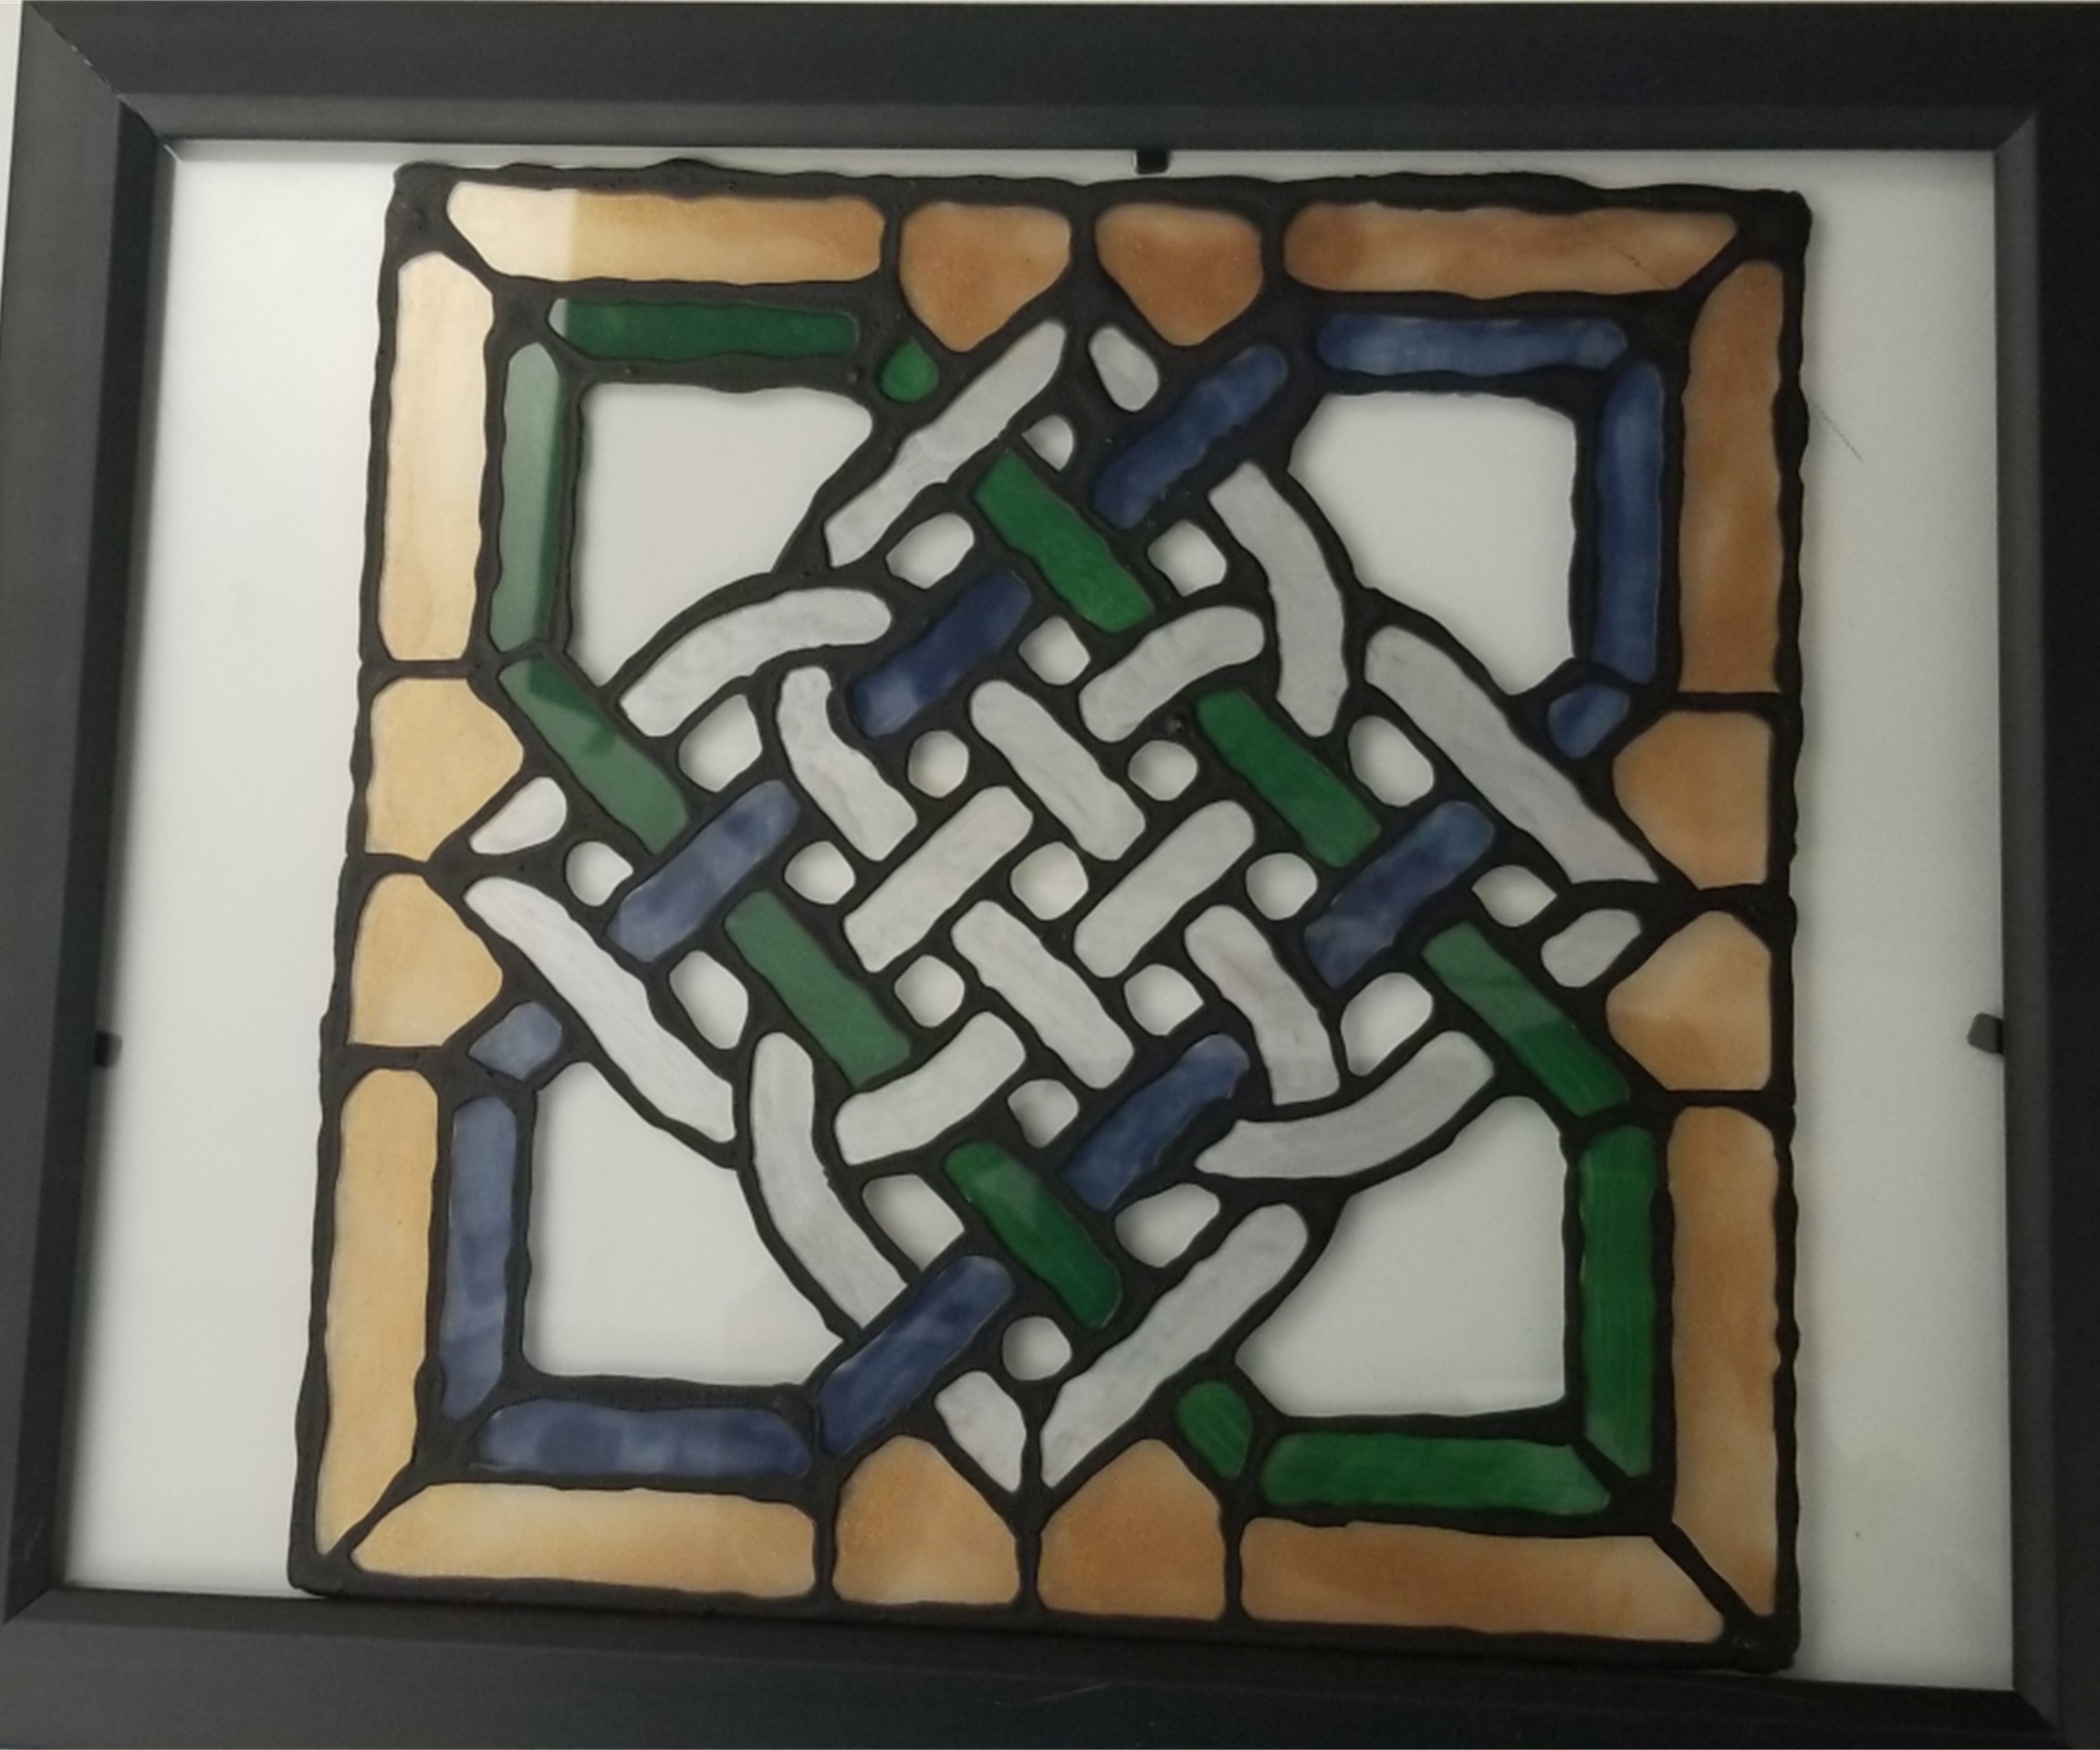 A green, gold, and white knotwork design on glass